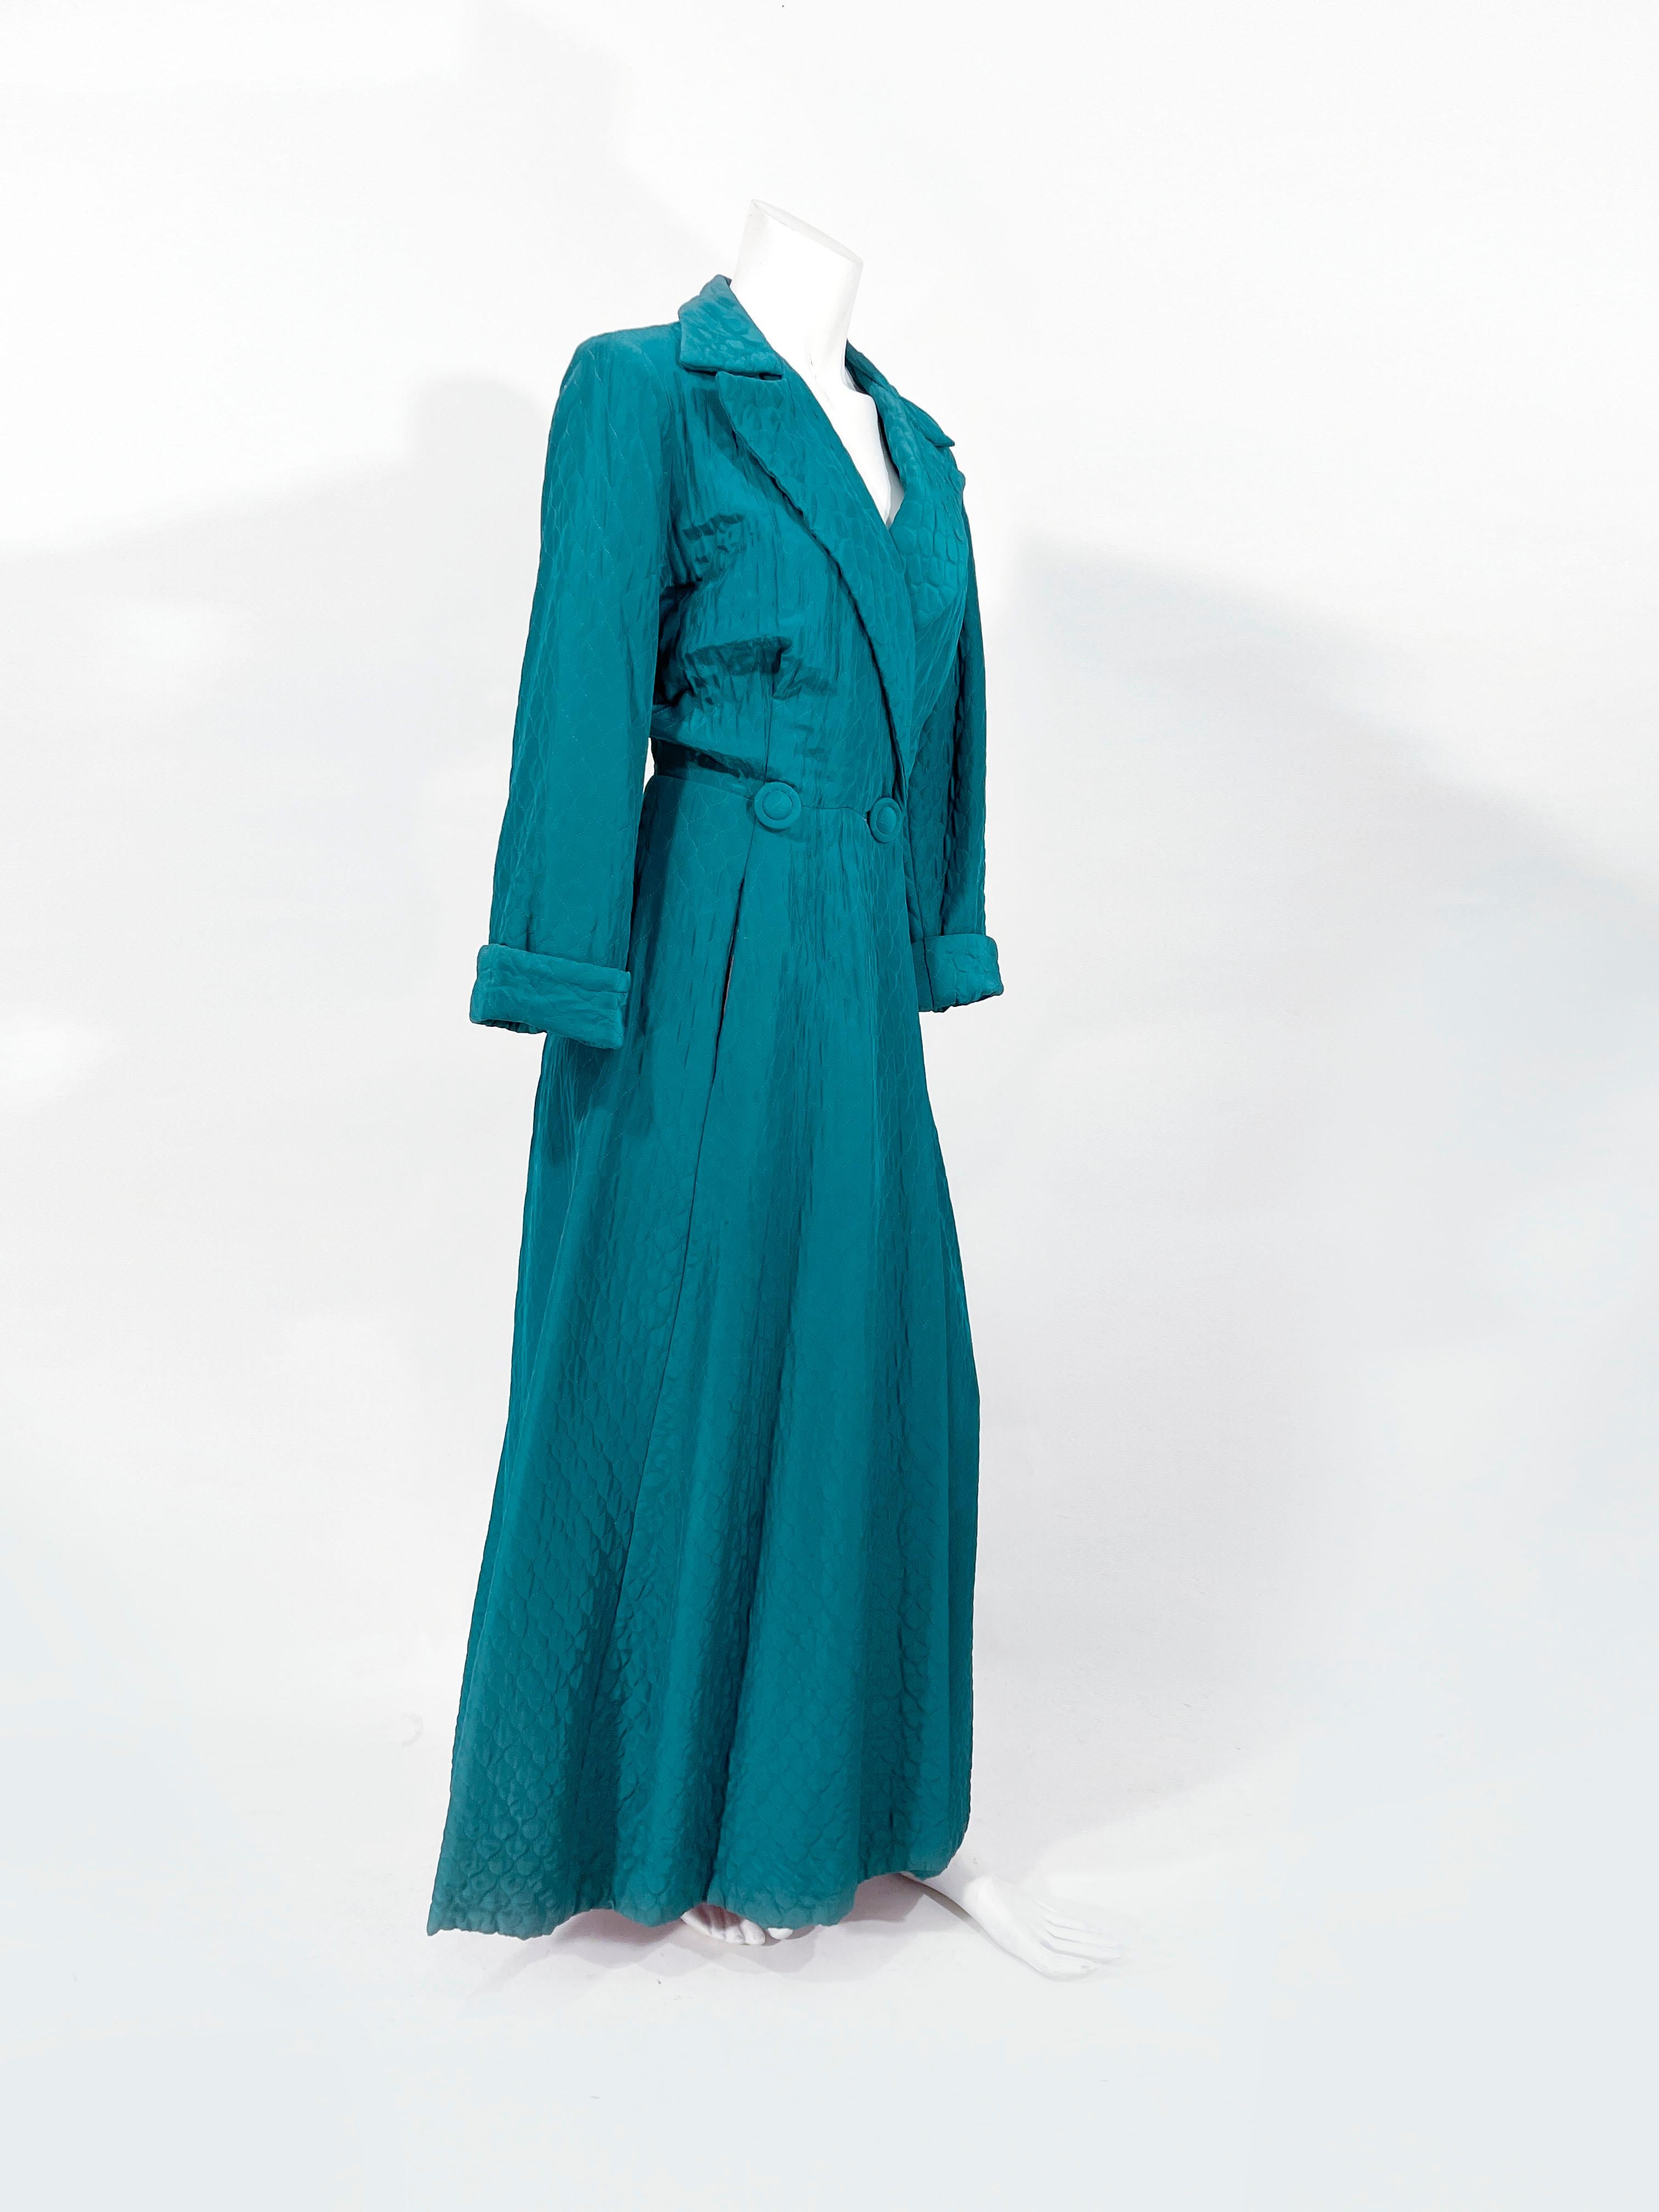 Women's 1940s/1950s Teal Green House Robe For Sale